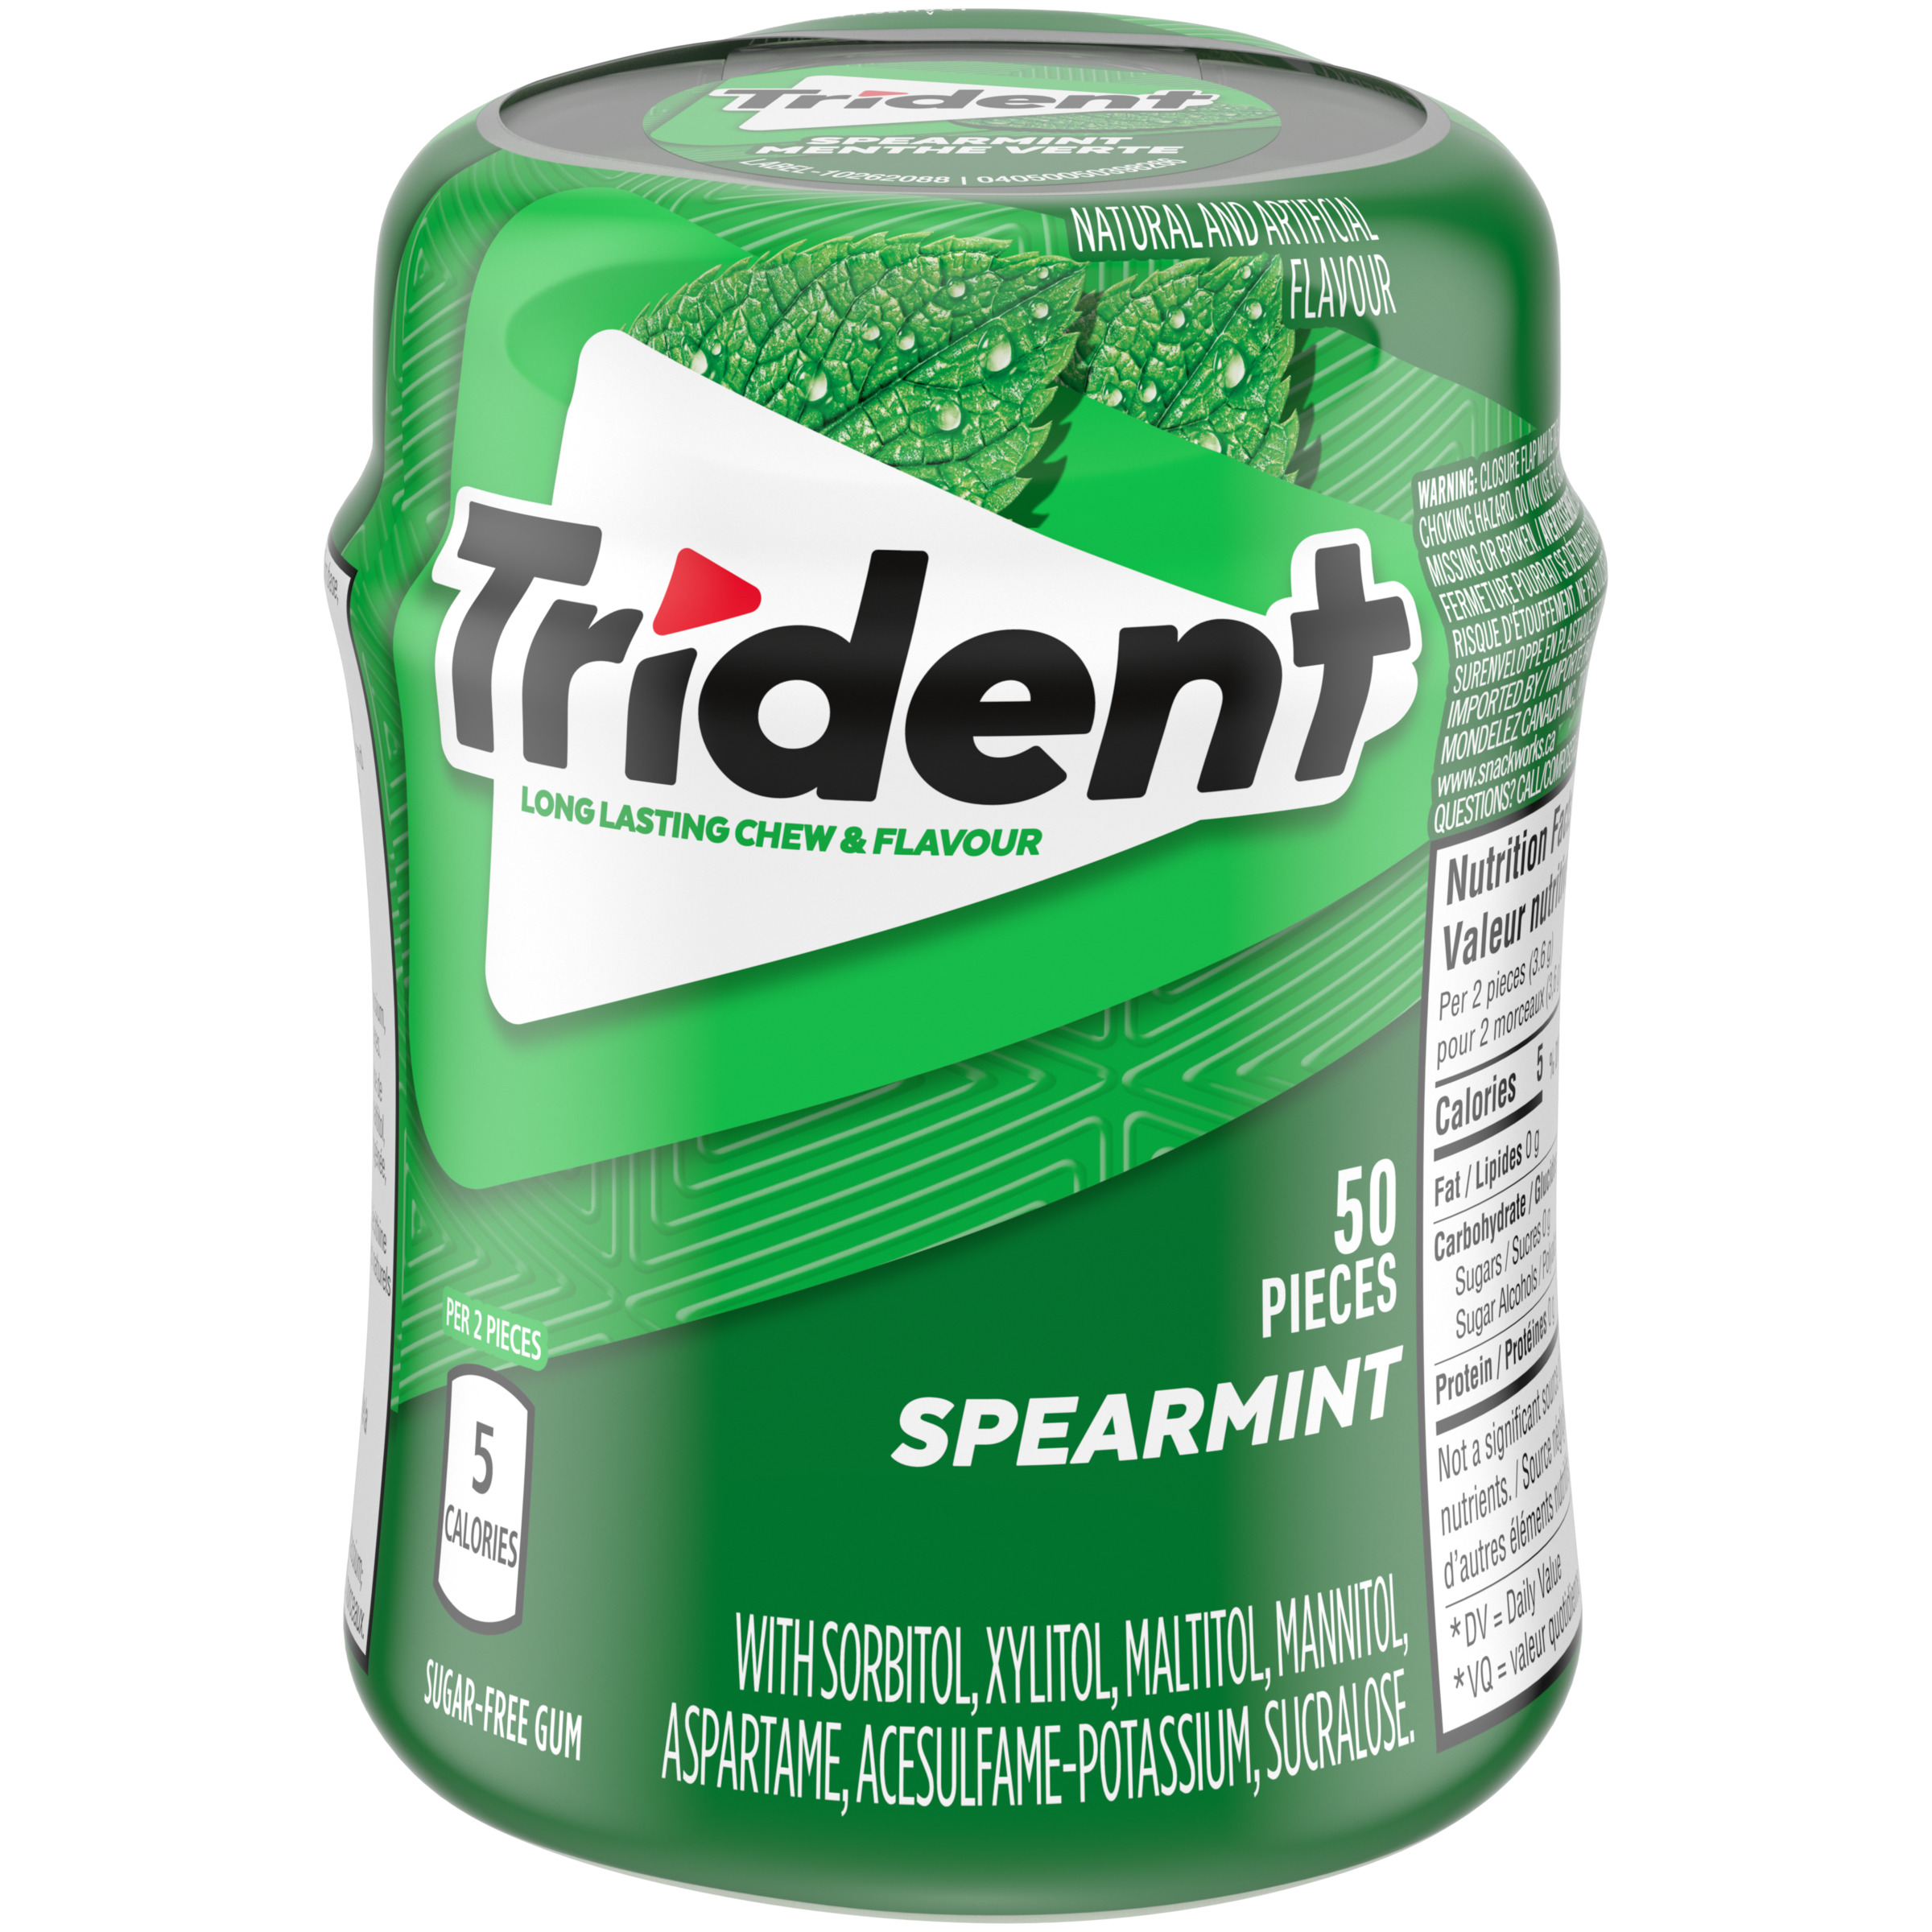 Trident Unwrapped Spearmint Sugar Free Gum, 1 Go-Cup (50 Pieces Total)